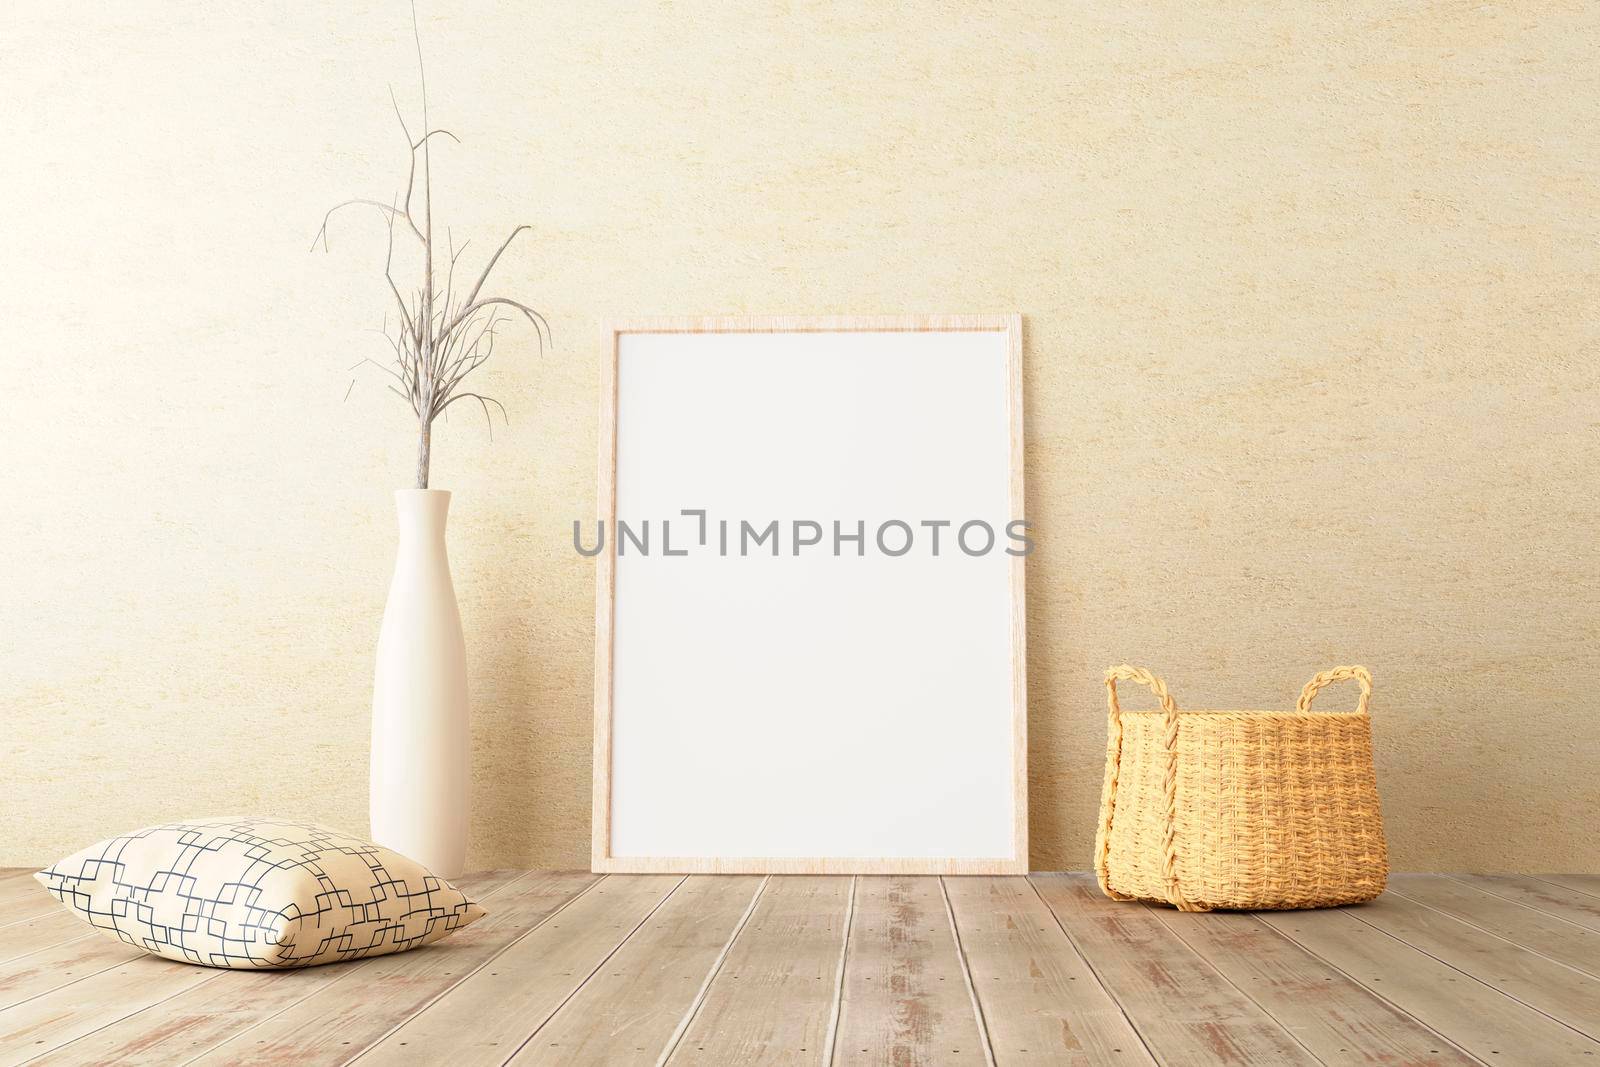 Vertical frame mockup standing on wooden floor in living room interior with dried plant, woven basket and pillow on concrete wall background. 3d illustration